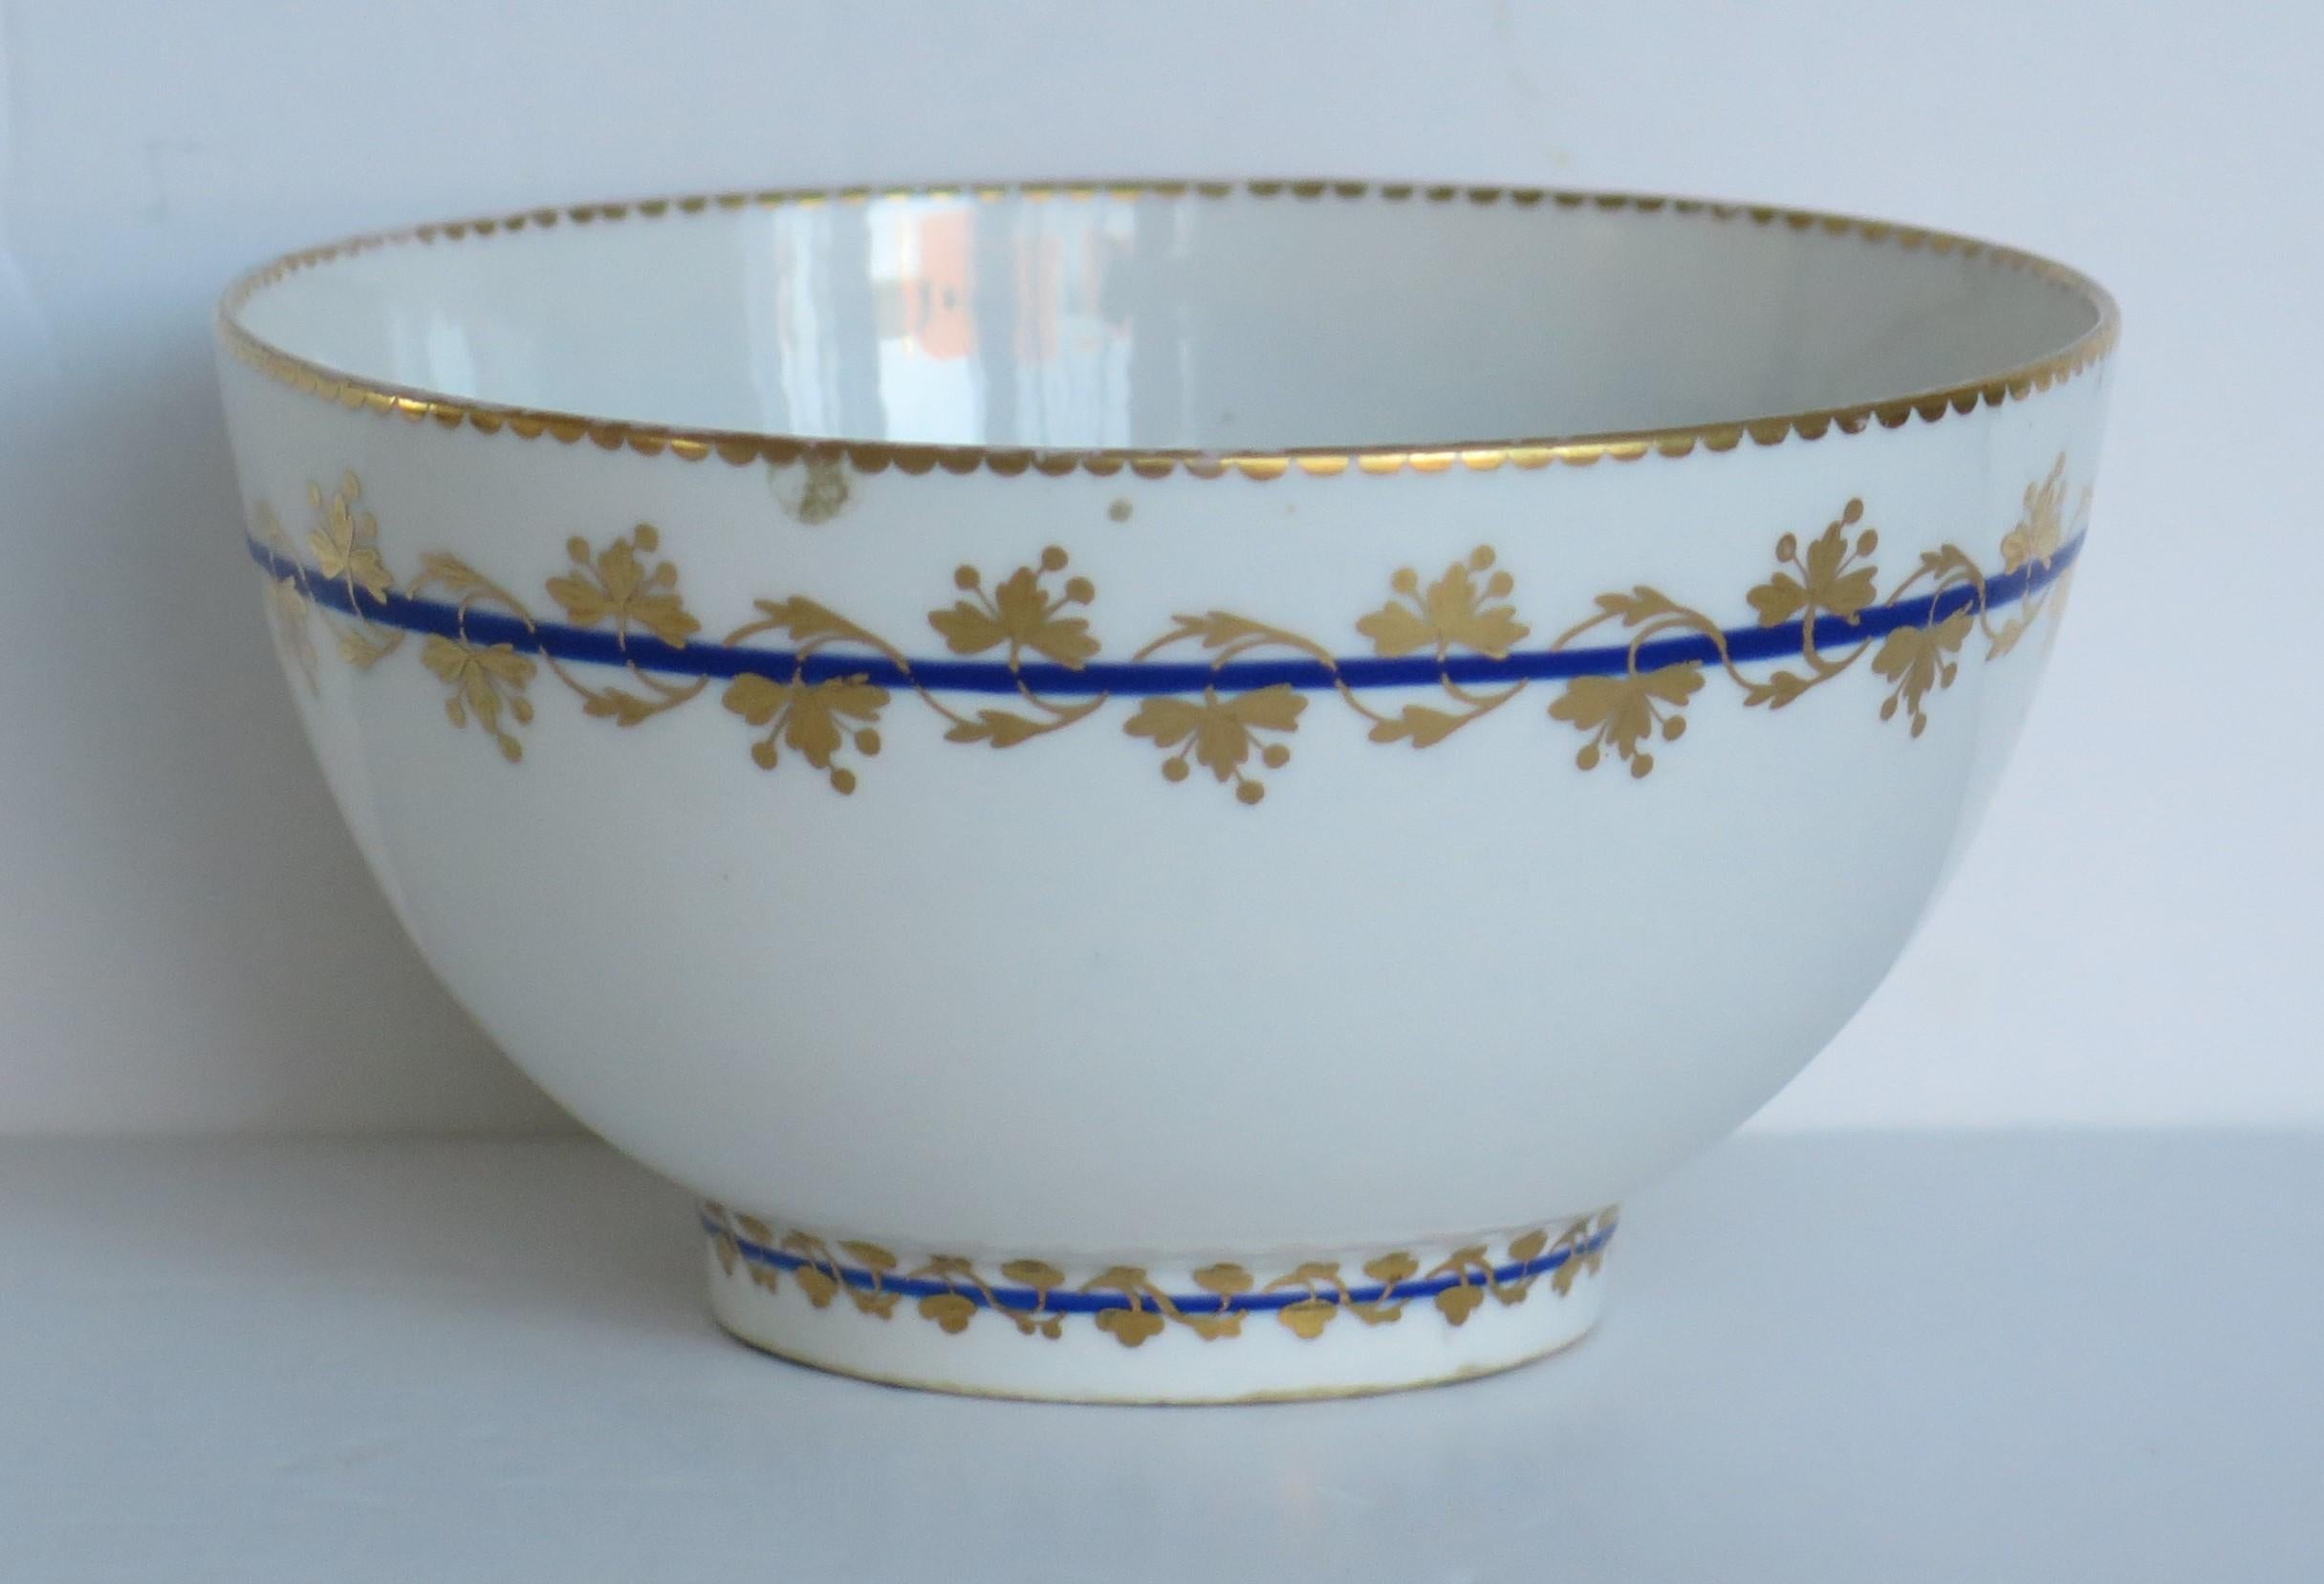 This is a fine quality Derby porcelain bowl in pattern number 110, fully marked with puce crown & battons and dating to 11790, George 111rd period.

It is beautifully decorated in Derby's Pattern 110, with a gilt dentil rim and borders top and